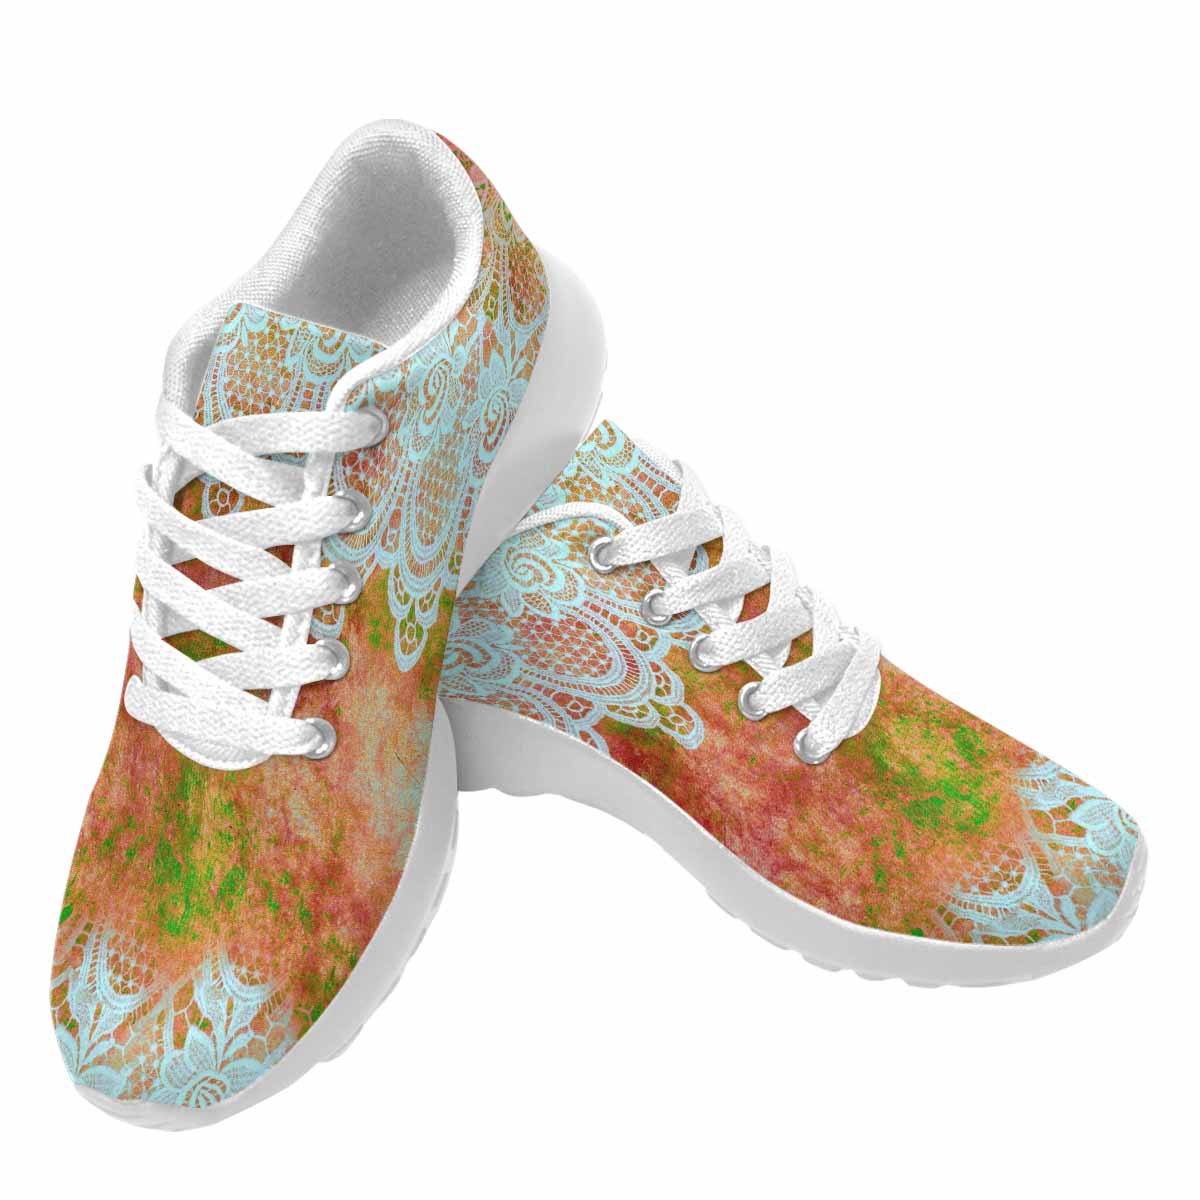 Victorian lace print, womens cute casual or running sneakers, design 31